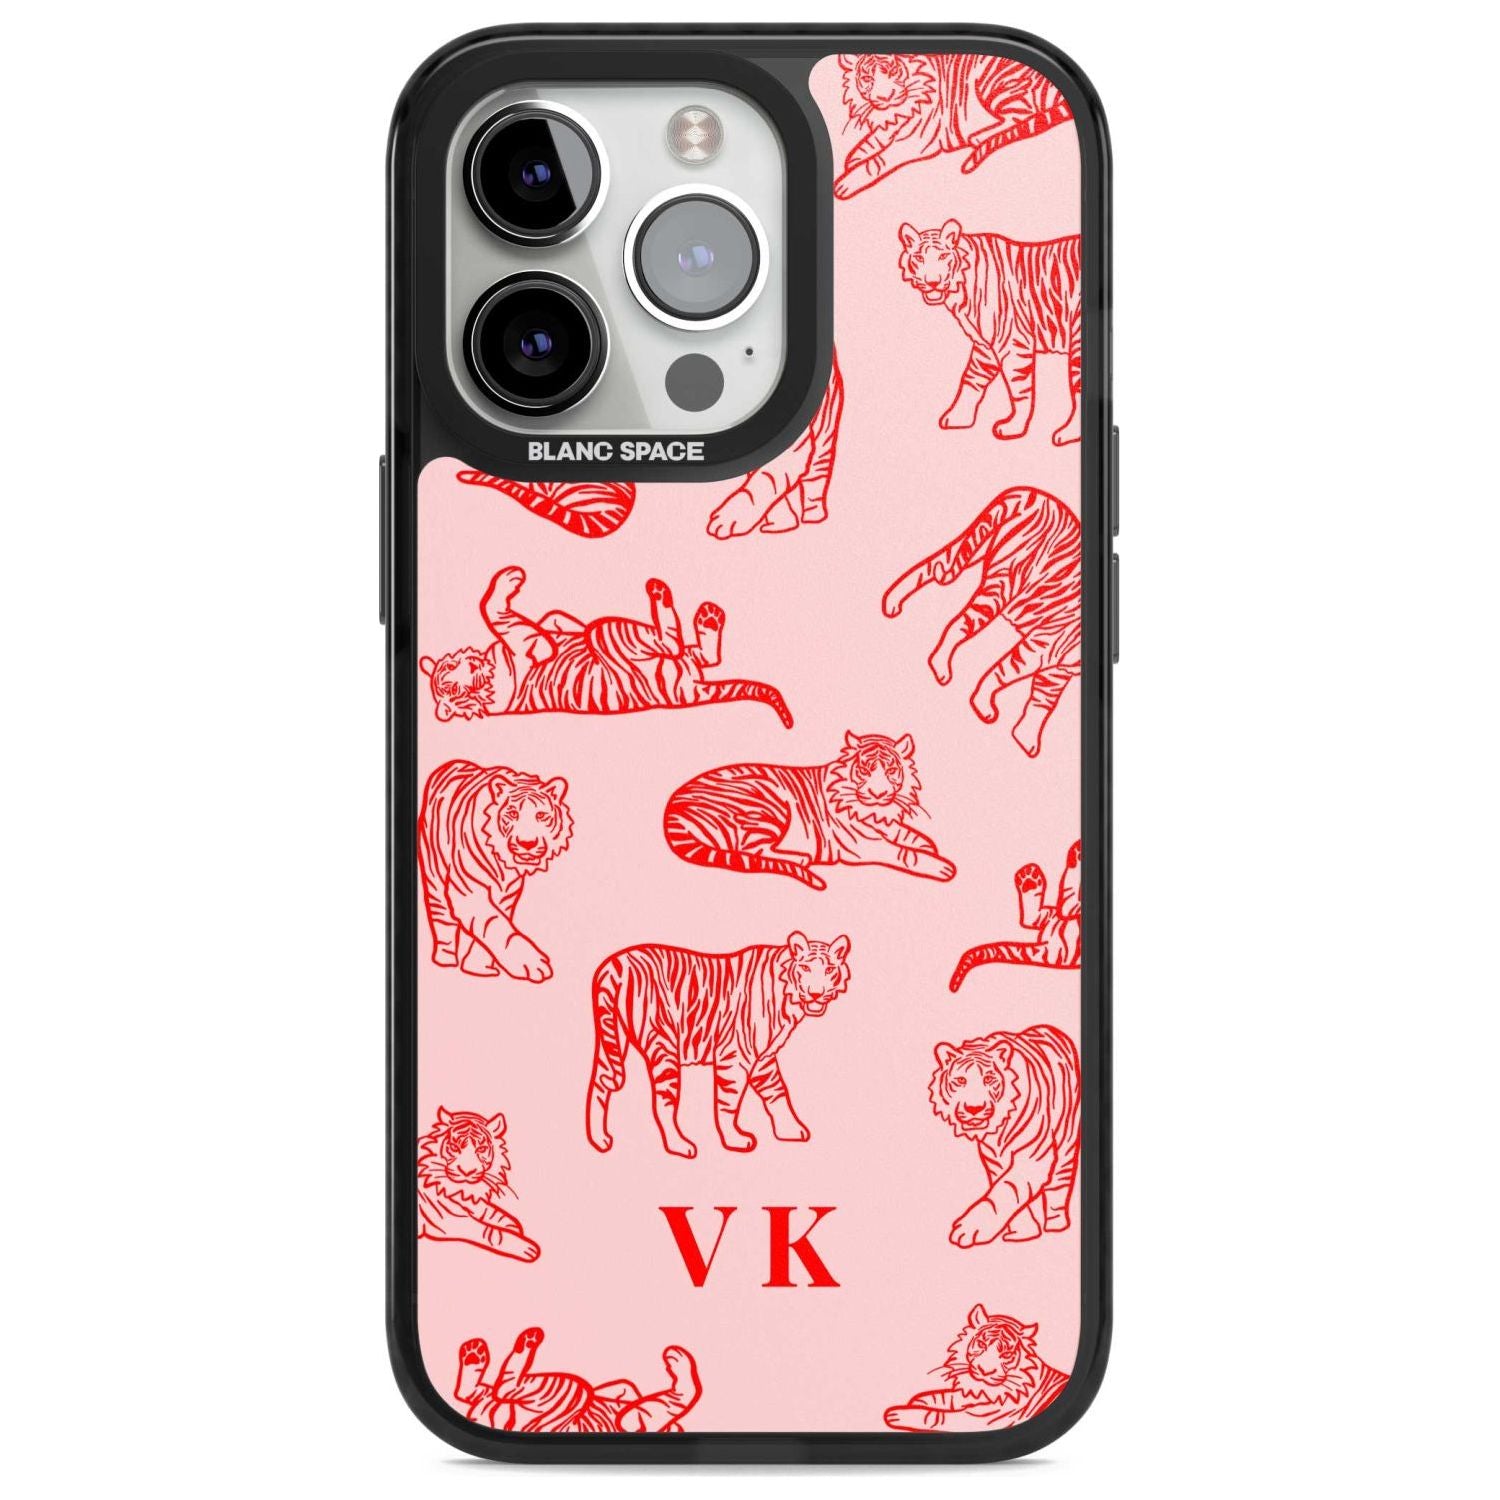 Personalised Red Tiger Outlines on Pink Custom Phone Case iPhone 15 Pro Max / Magsafe Black Impact Case,iPhone 15 Pro / Magsafe Black Impact Case,iPhone 14 Pro Max / Magsafe Black Impact Case,iPhone 14 Pro / Magsafe Black Impact Case,iPhone 13 Pro / Magsafe Black Impact Case Blanc Space